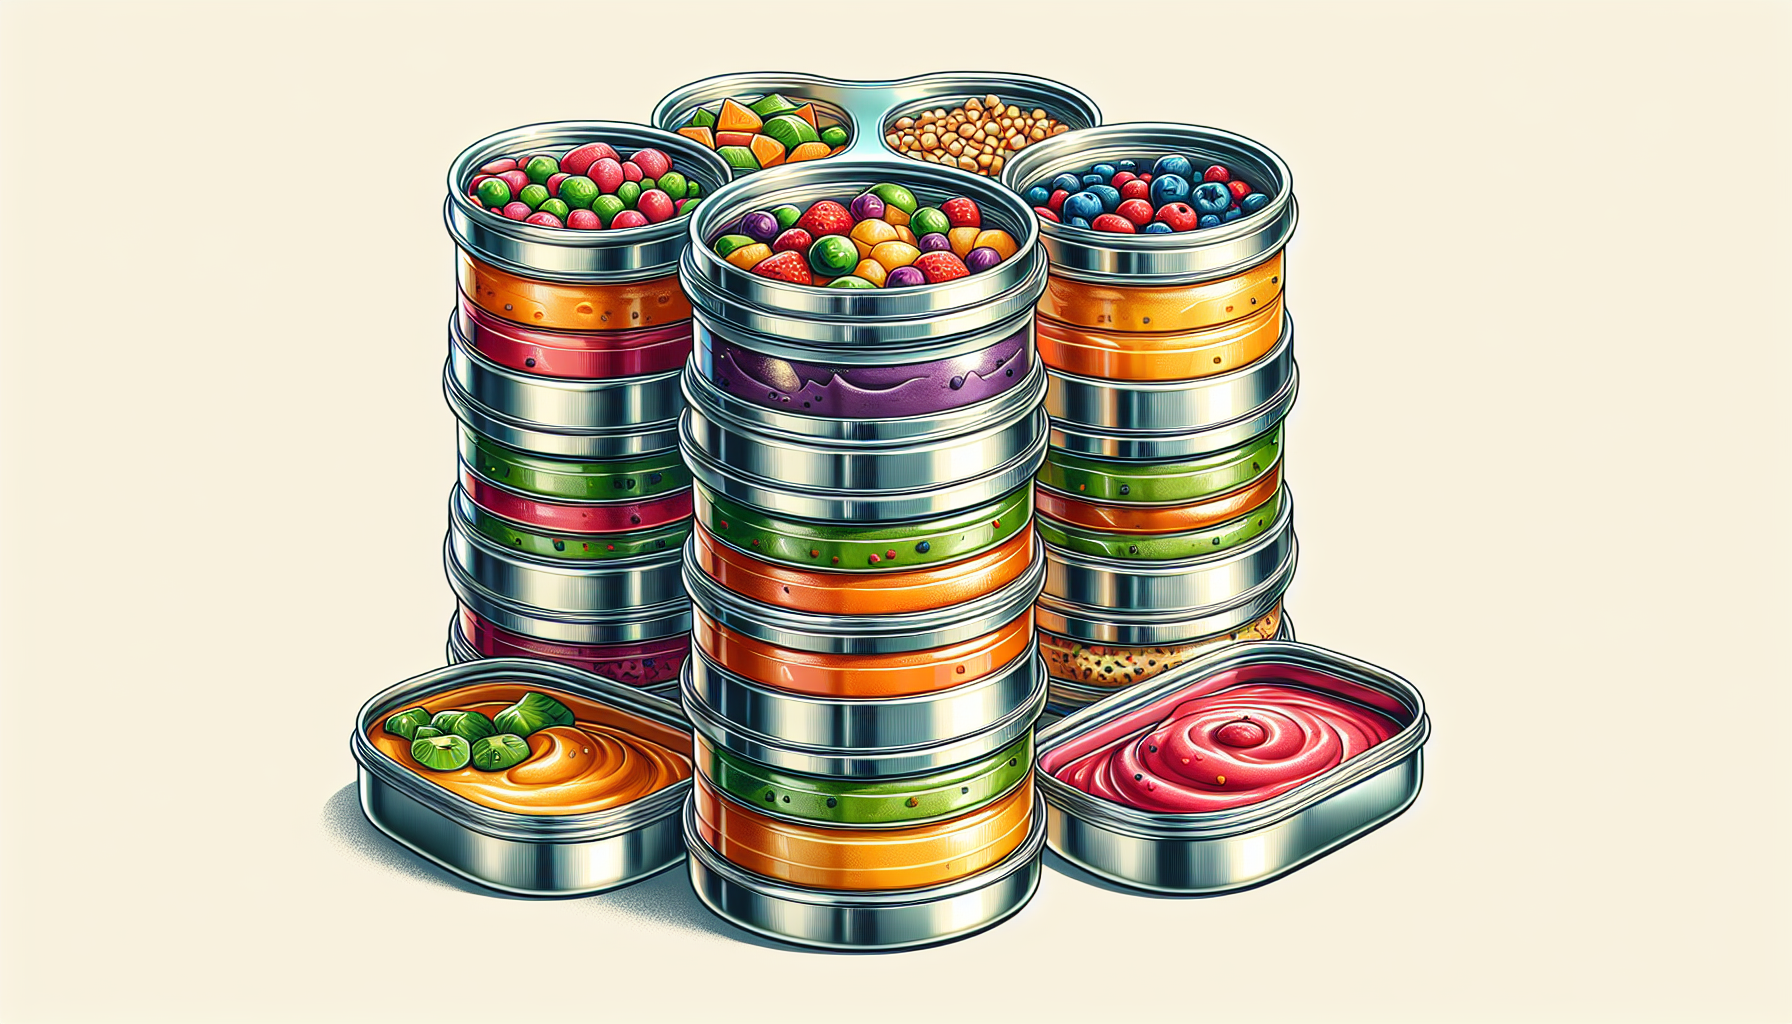 Stainless steel containers in special diets